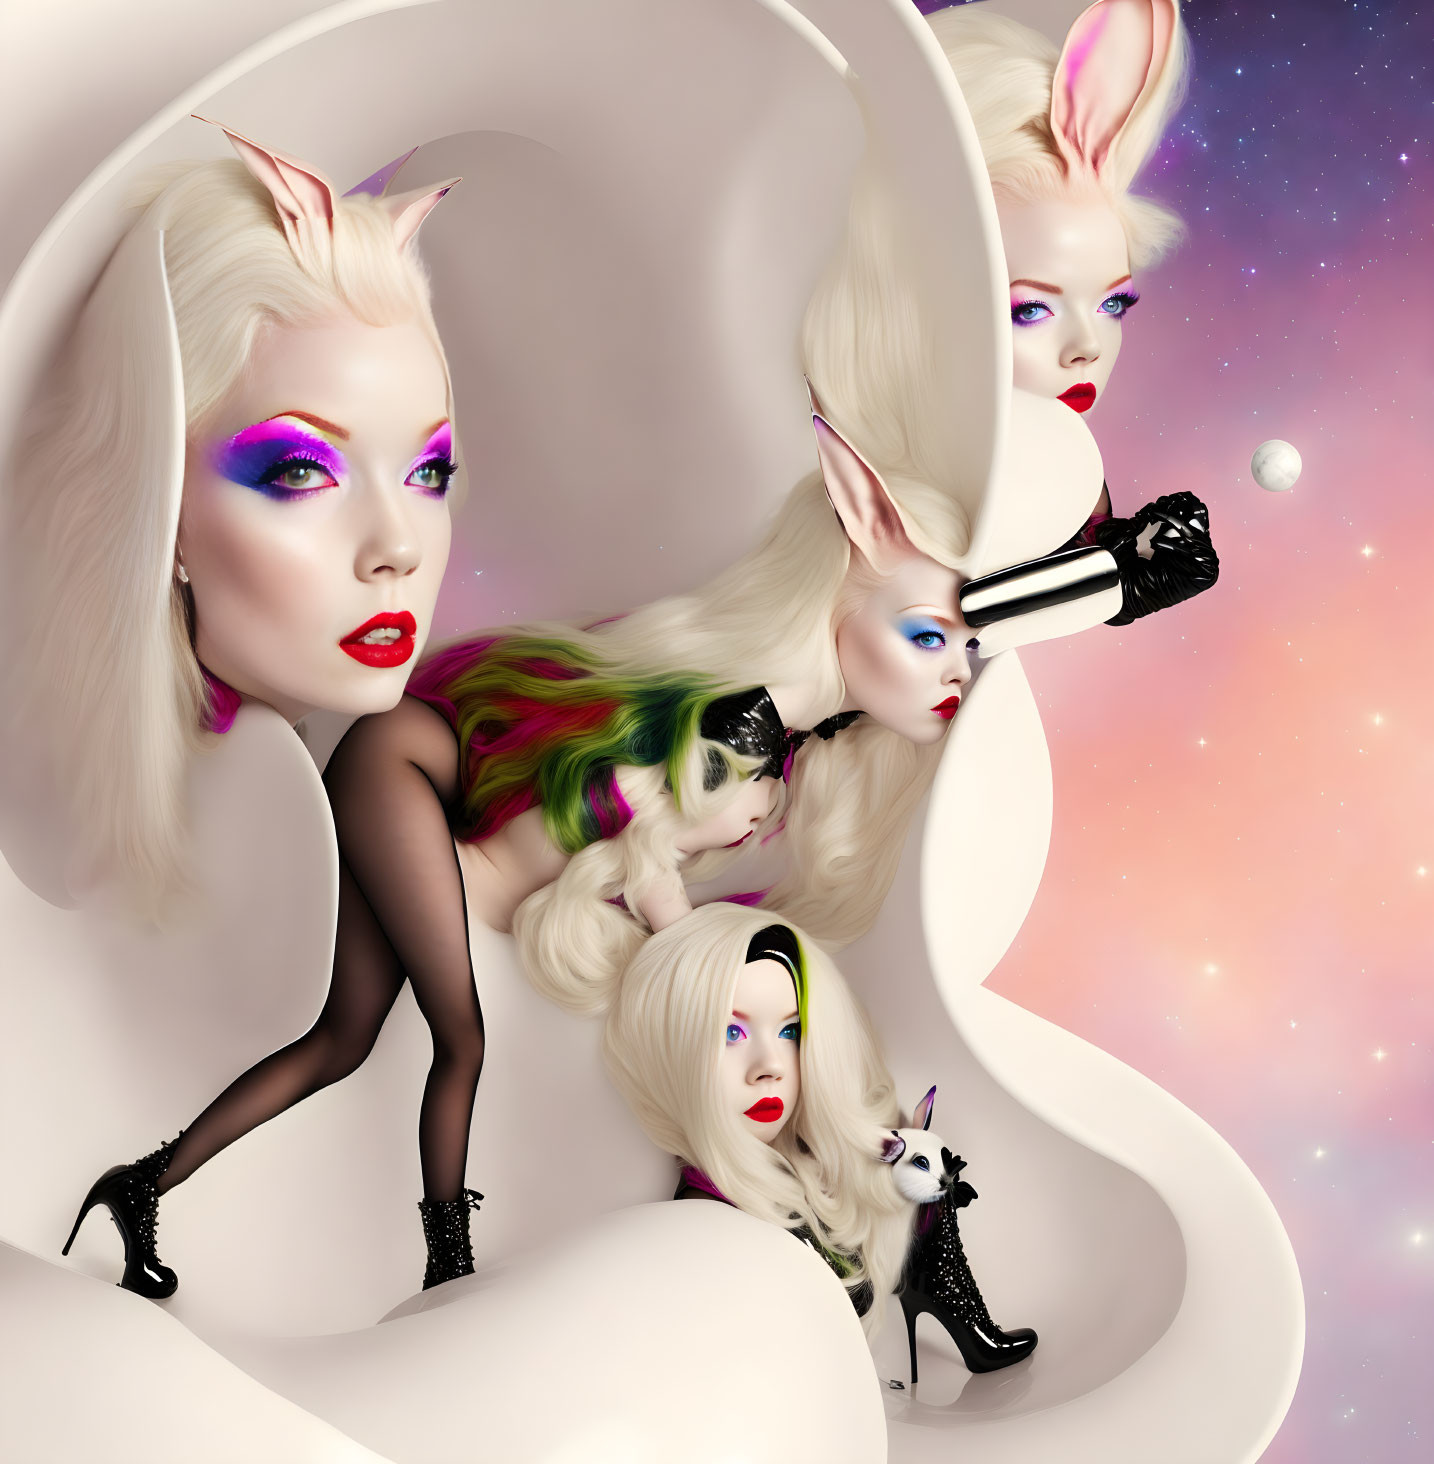 Surreal illustration of three women with rabbit features and avant-garde makeup, with a black dog